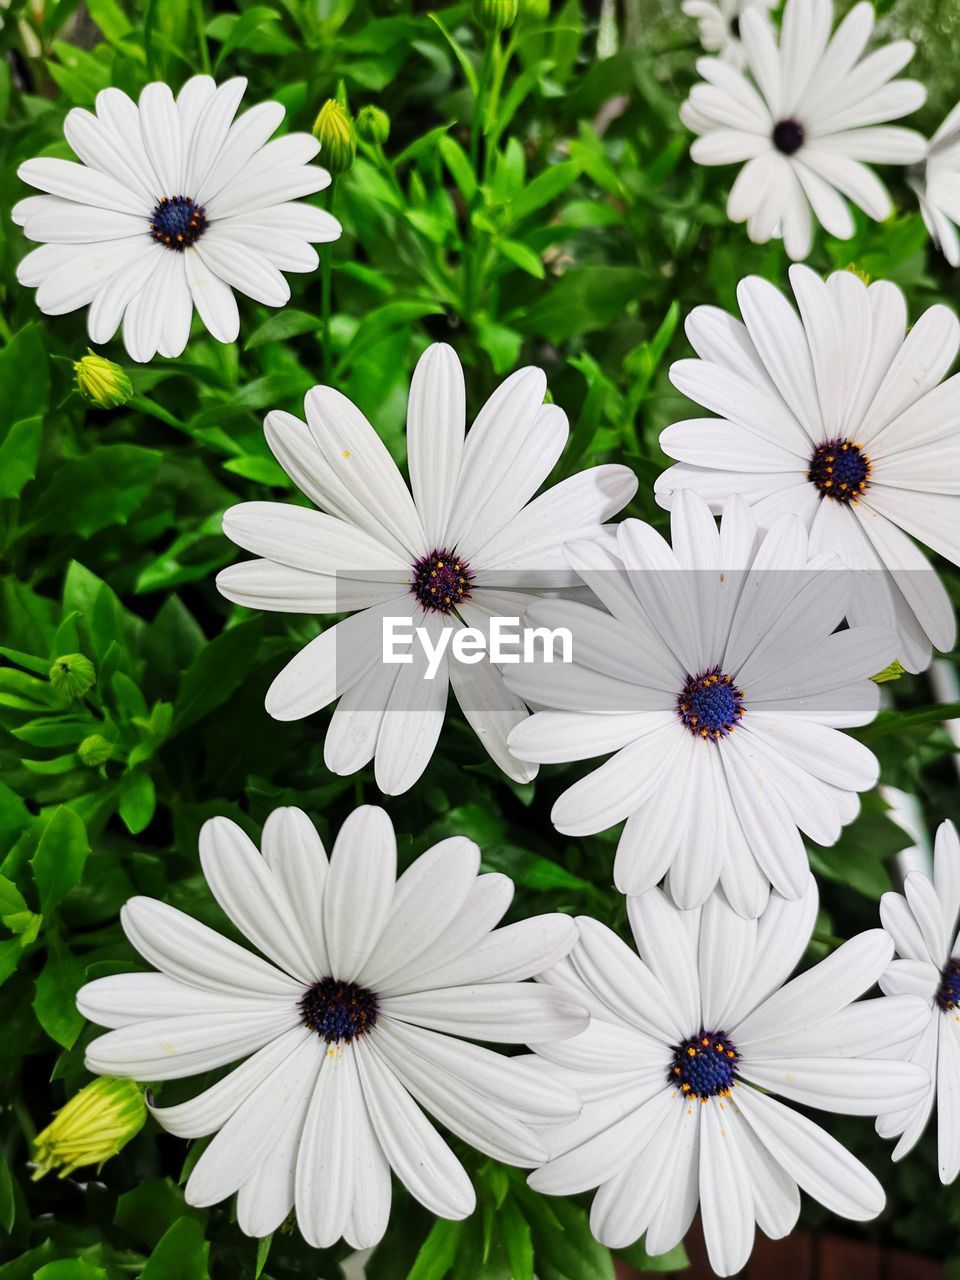 flower, flowering plant, plant, freshness, beauty in nature, fragility, growth, petal, flower head, close-up, inflorescence, nature, white, osteospermum, no people, pollen, daisy, botany, day, outdoors, focus on foreground